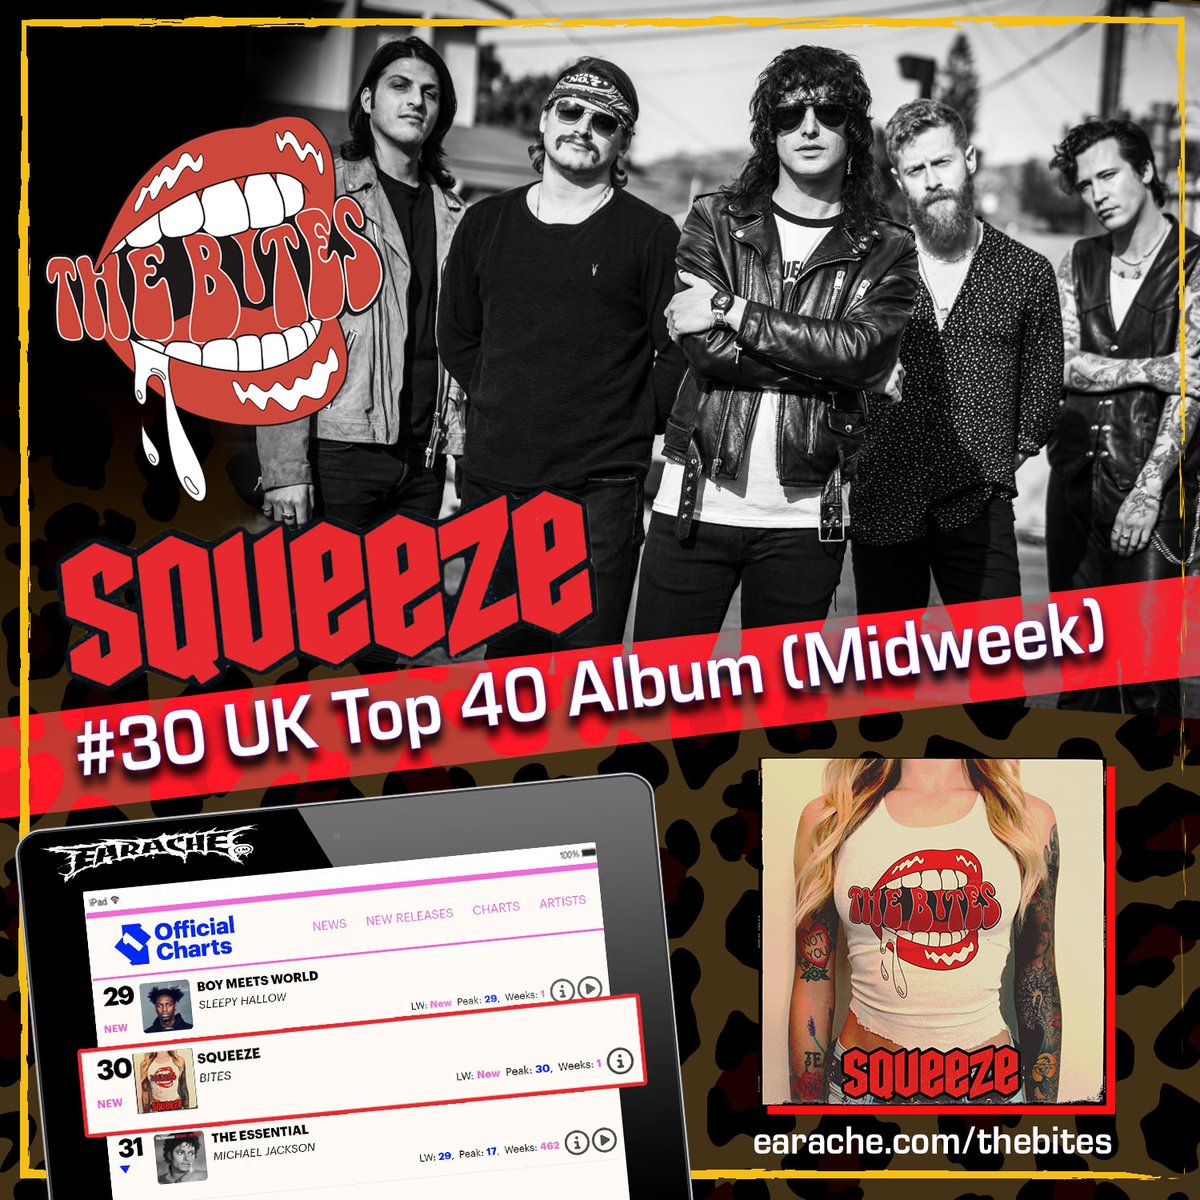 Congratulations to The Bites, who are on track for the highest UK album chart debut by a US rock band in a decade!🌟 Sitting at #30 right now in the UK Top 40 midweek album chart with 'Squeeze'.🤘 Help them stay there for Friday's official chart! 💿🛒👉 earache.com/thebites